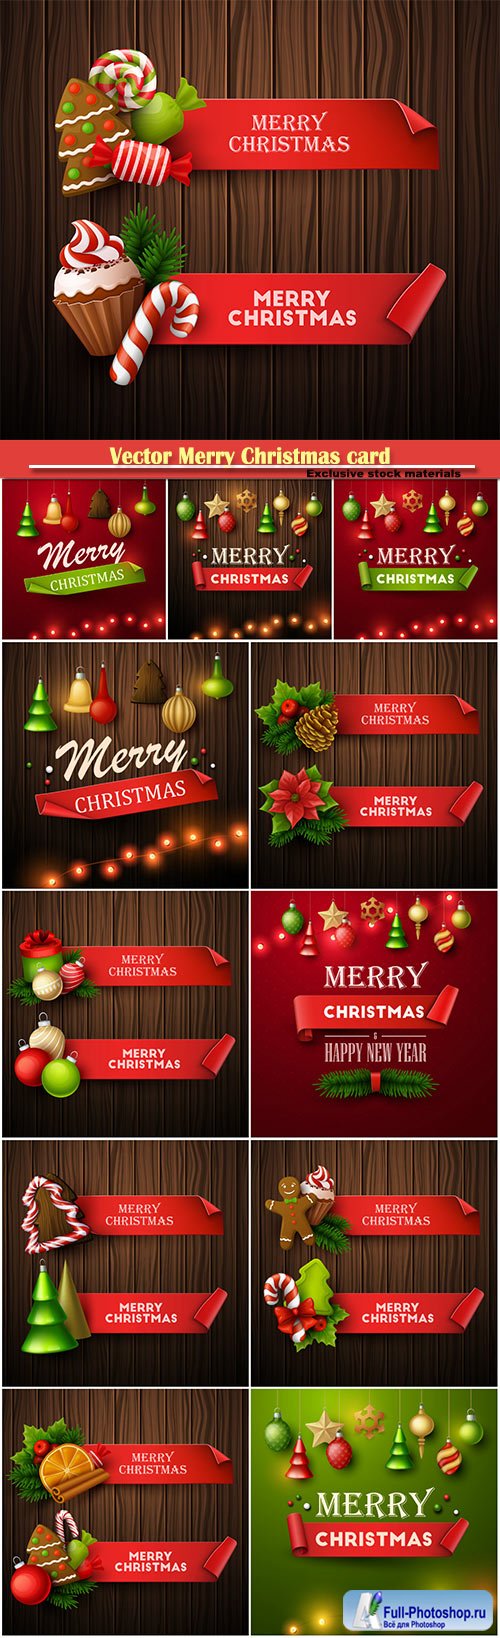 Vector Merry Christmas card and holiday banner